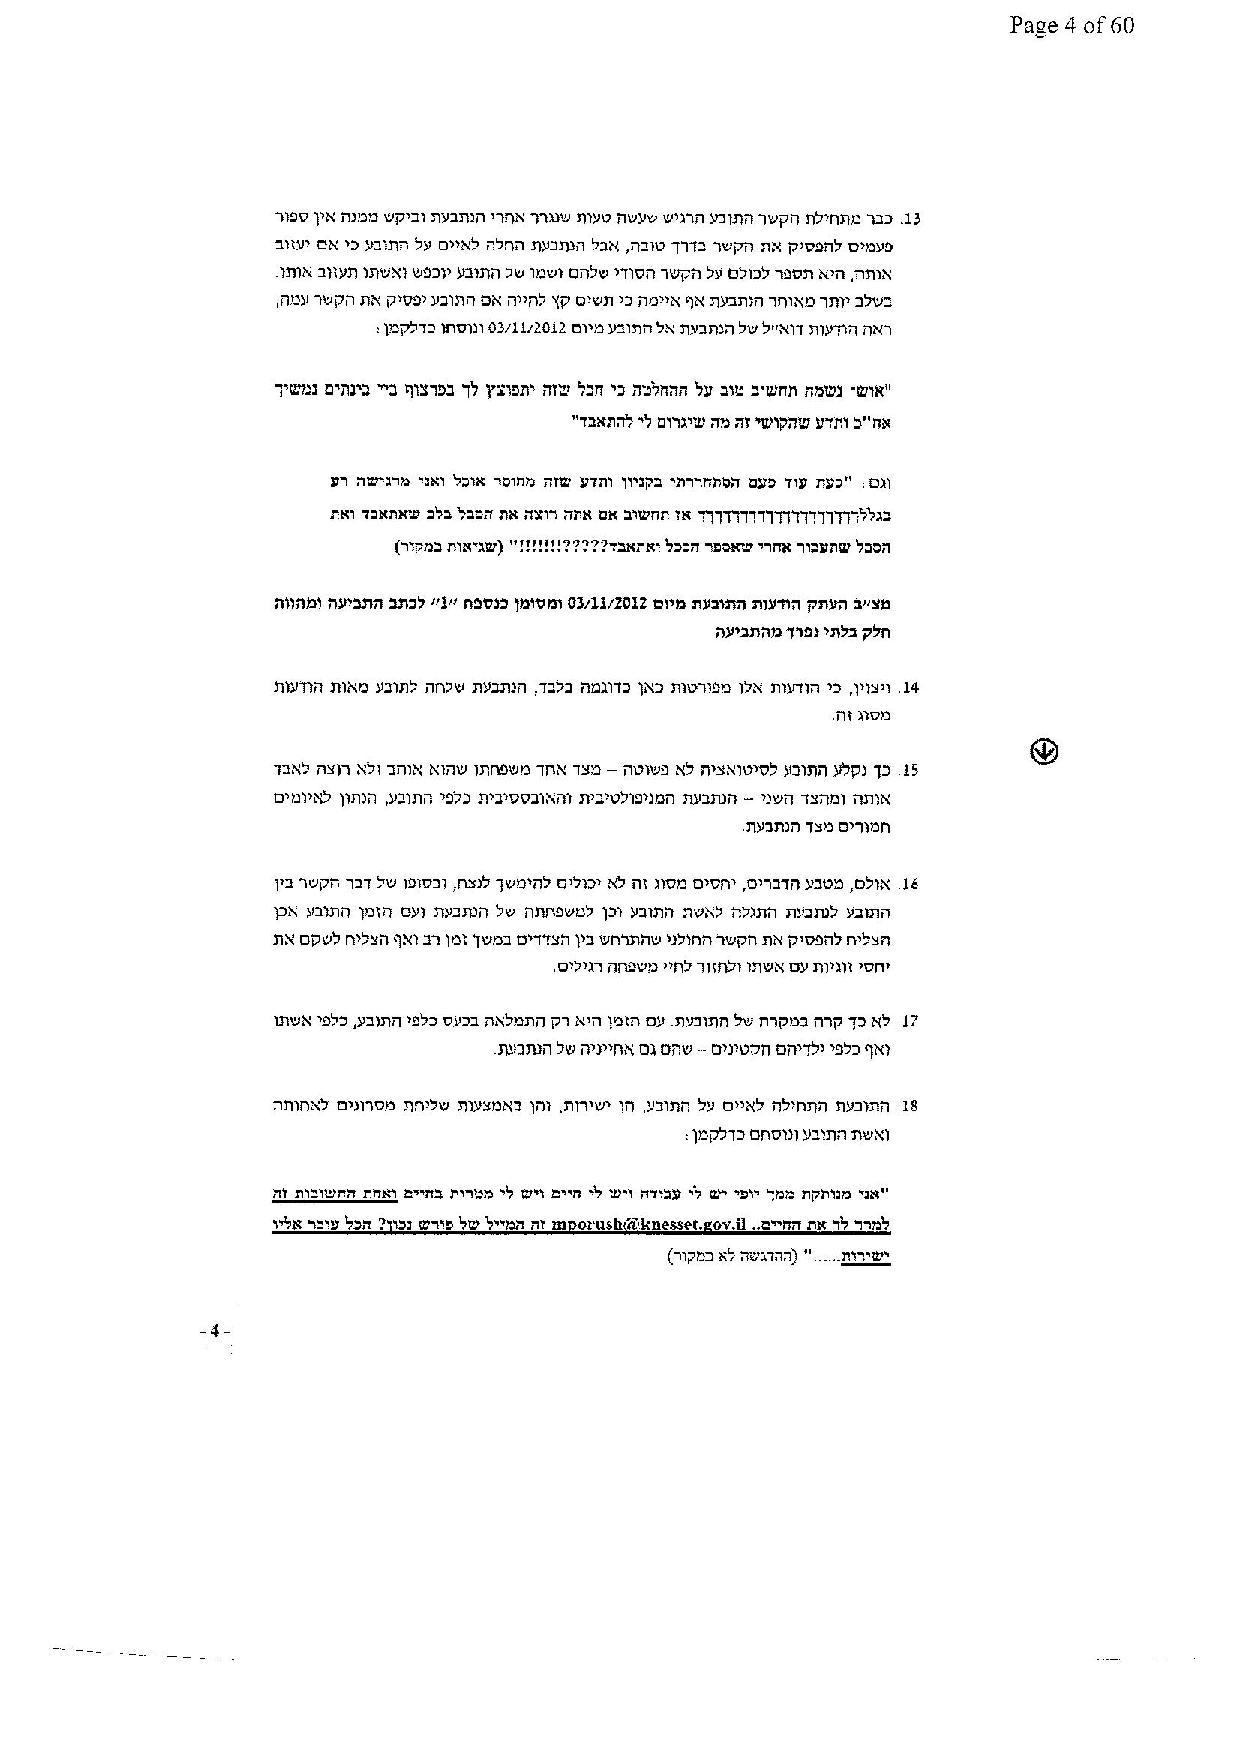 document-page-004